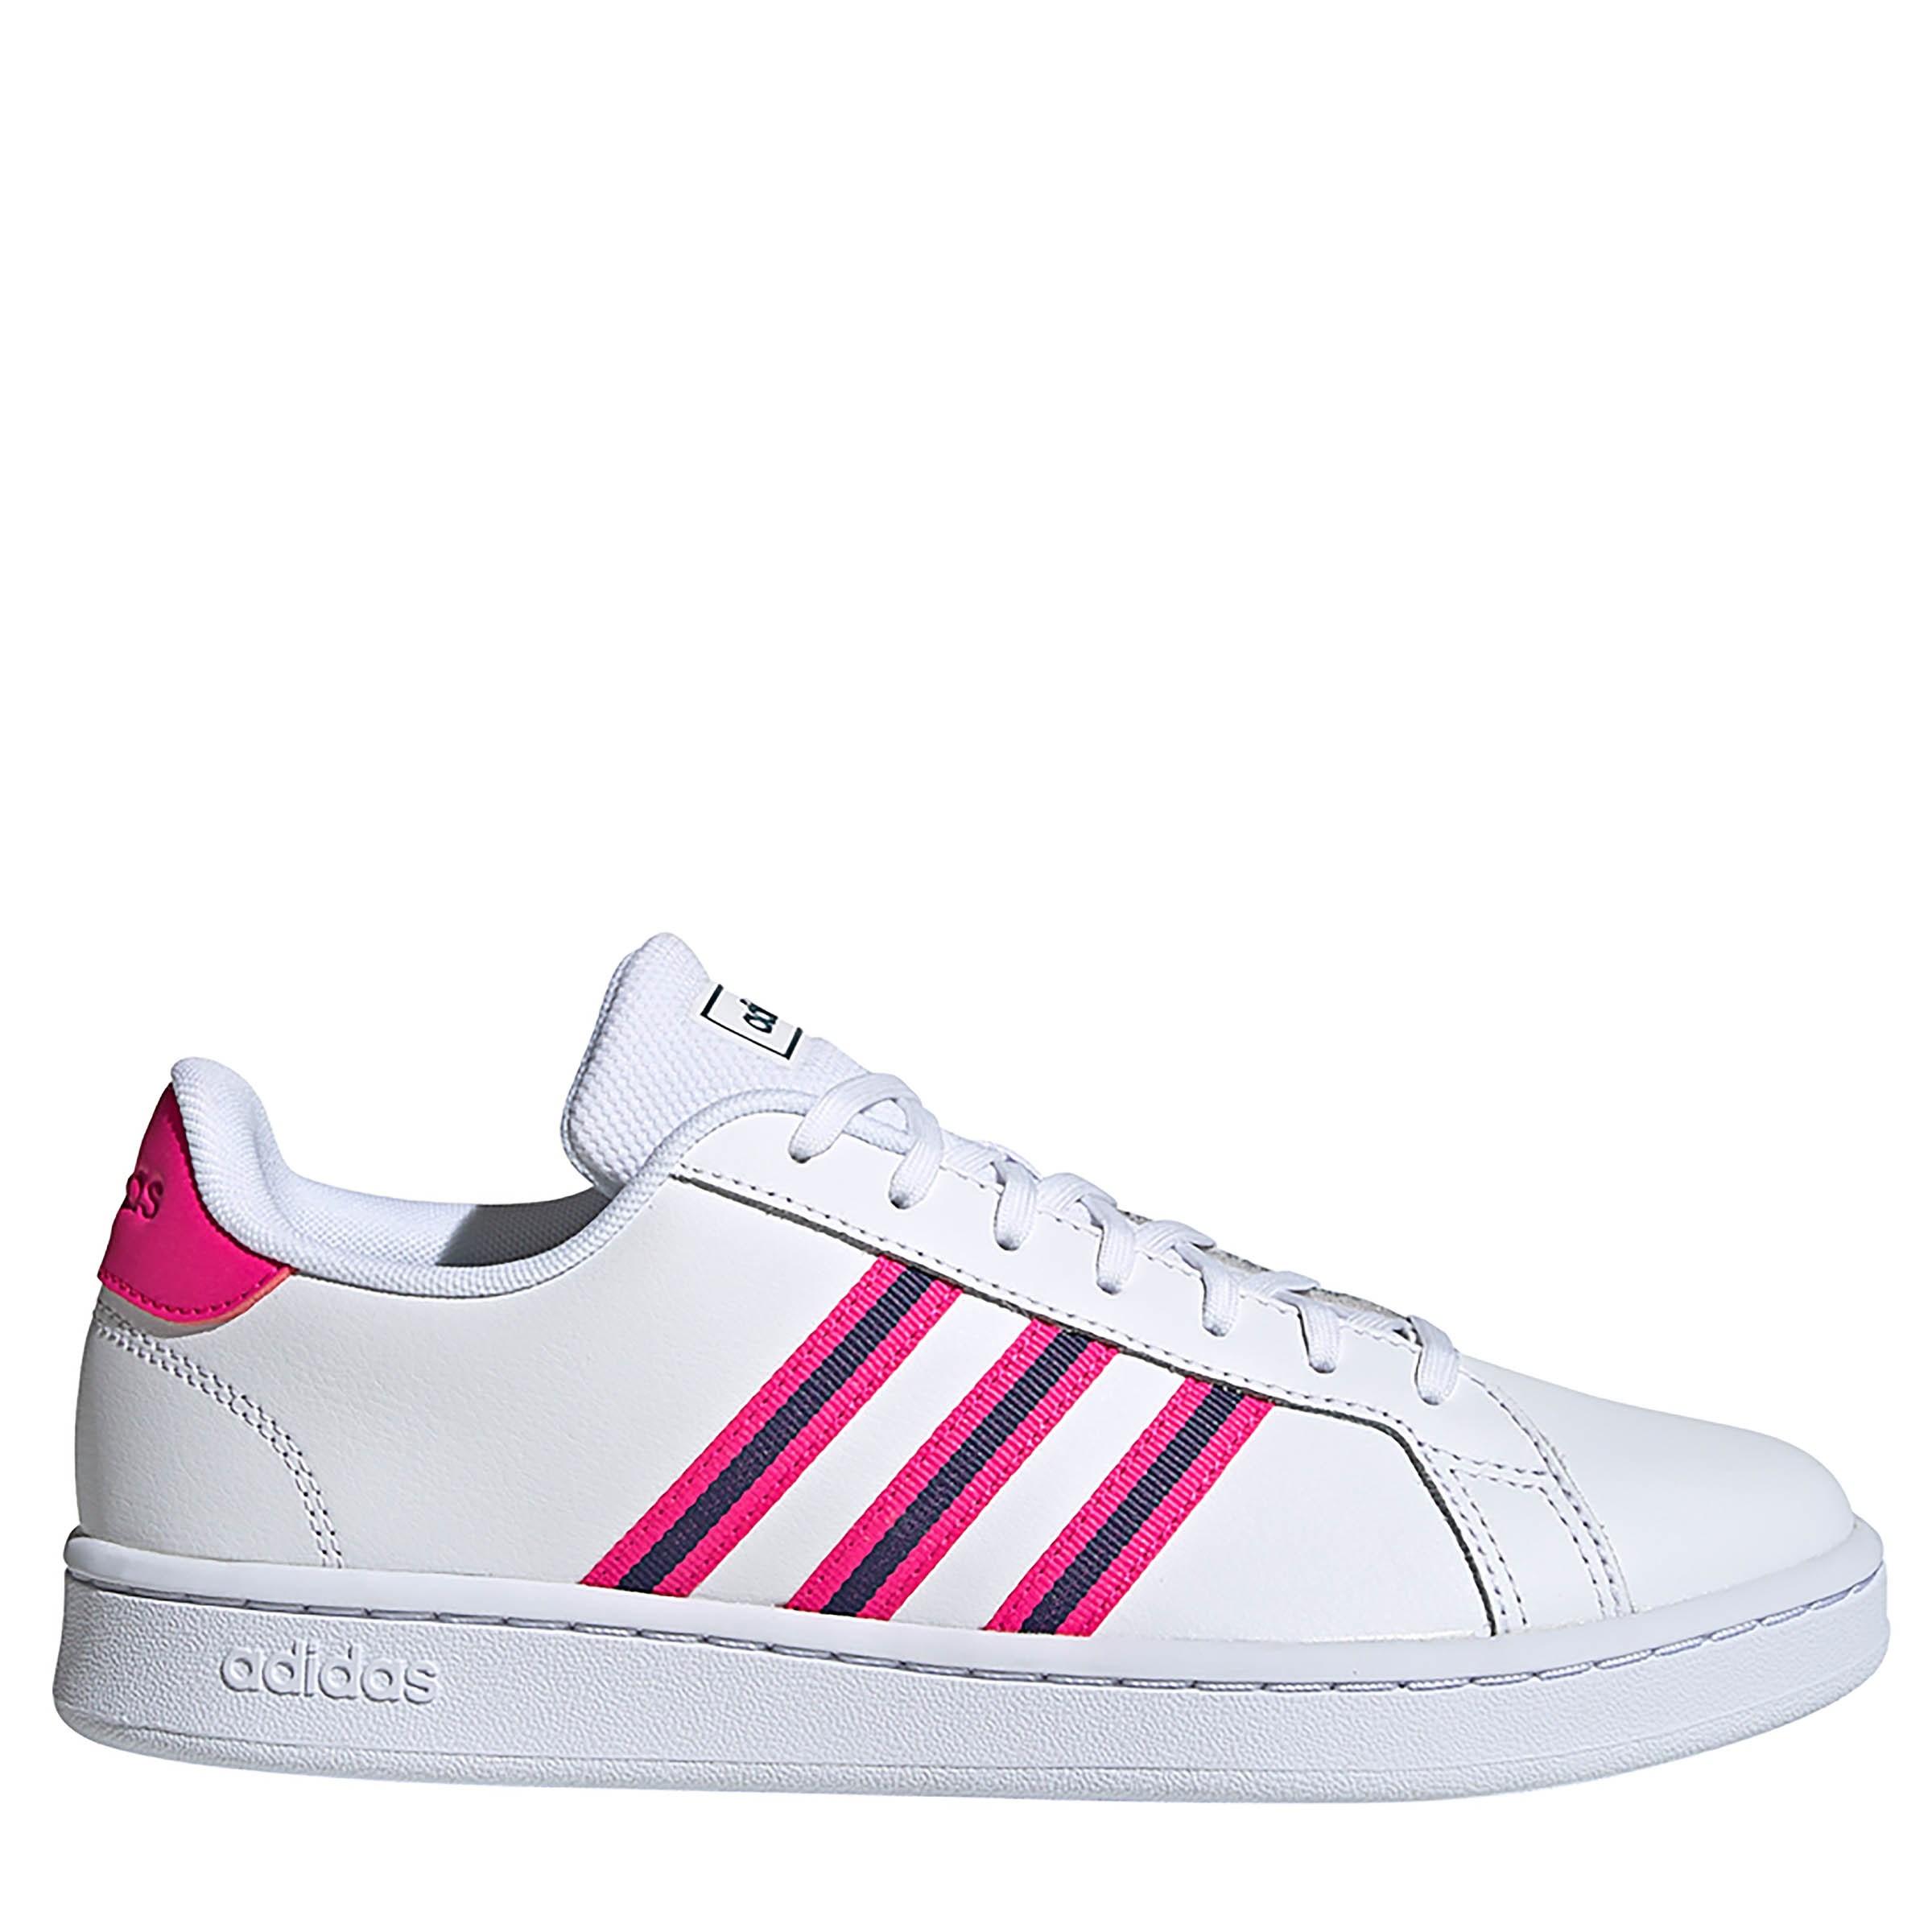 adidas Leather Grand Court Sneakers in Pink - Lyst